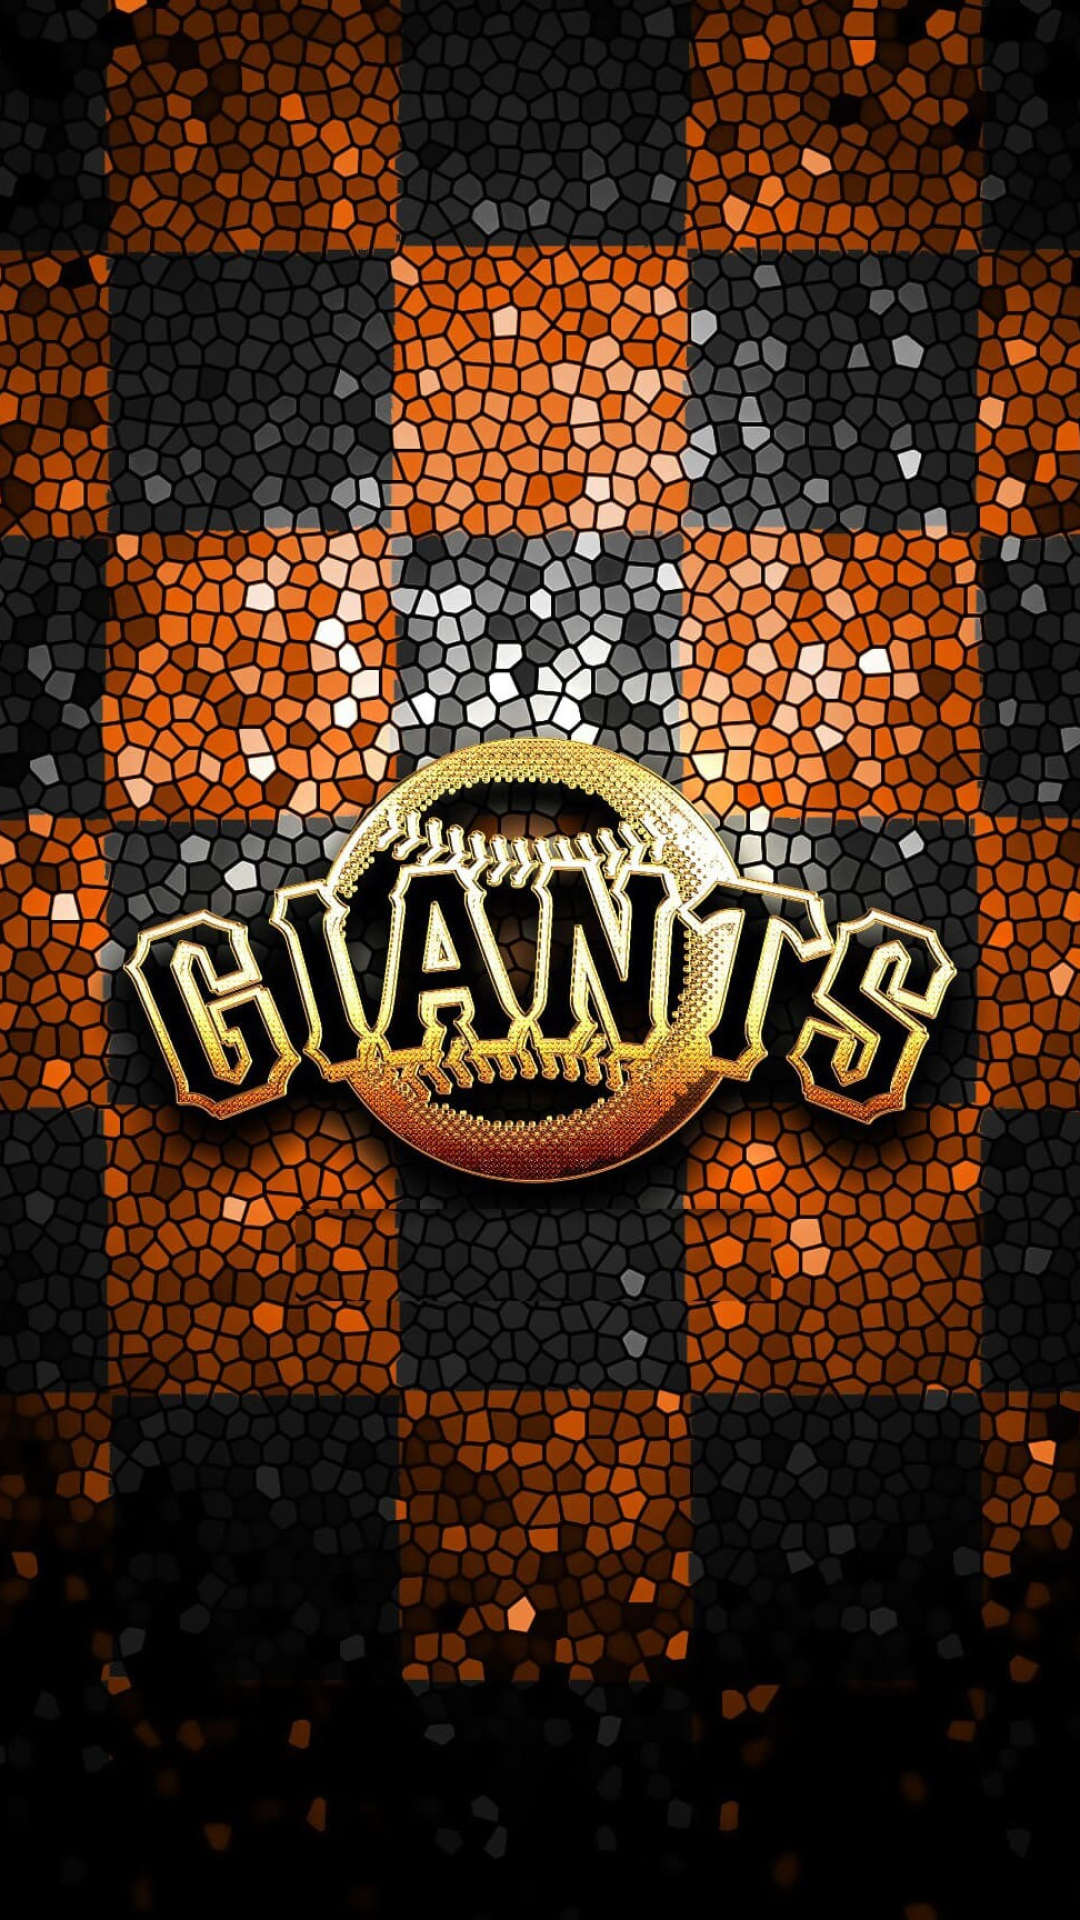 San Francisco Giants: The 1985 team lost 100 games, the most in franchise history. 1080x1920 Full HD Wallpaper.